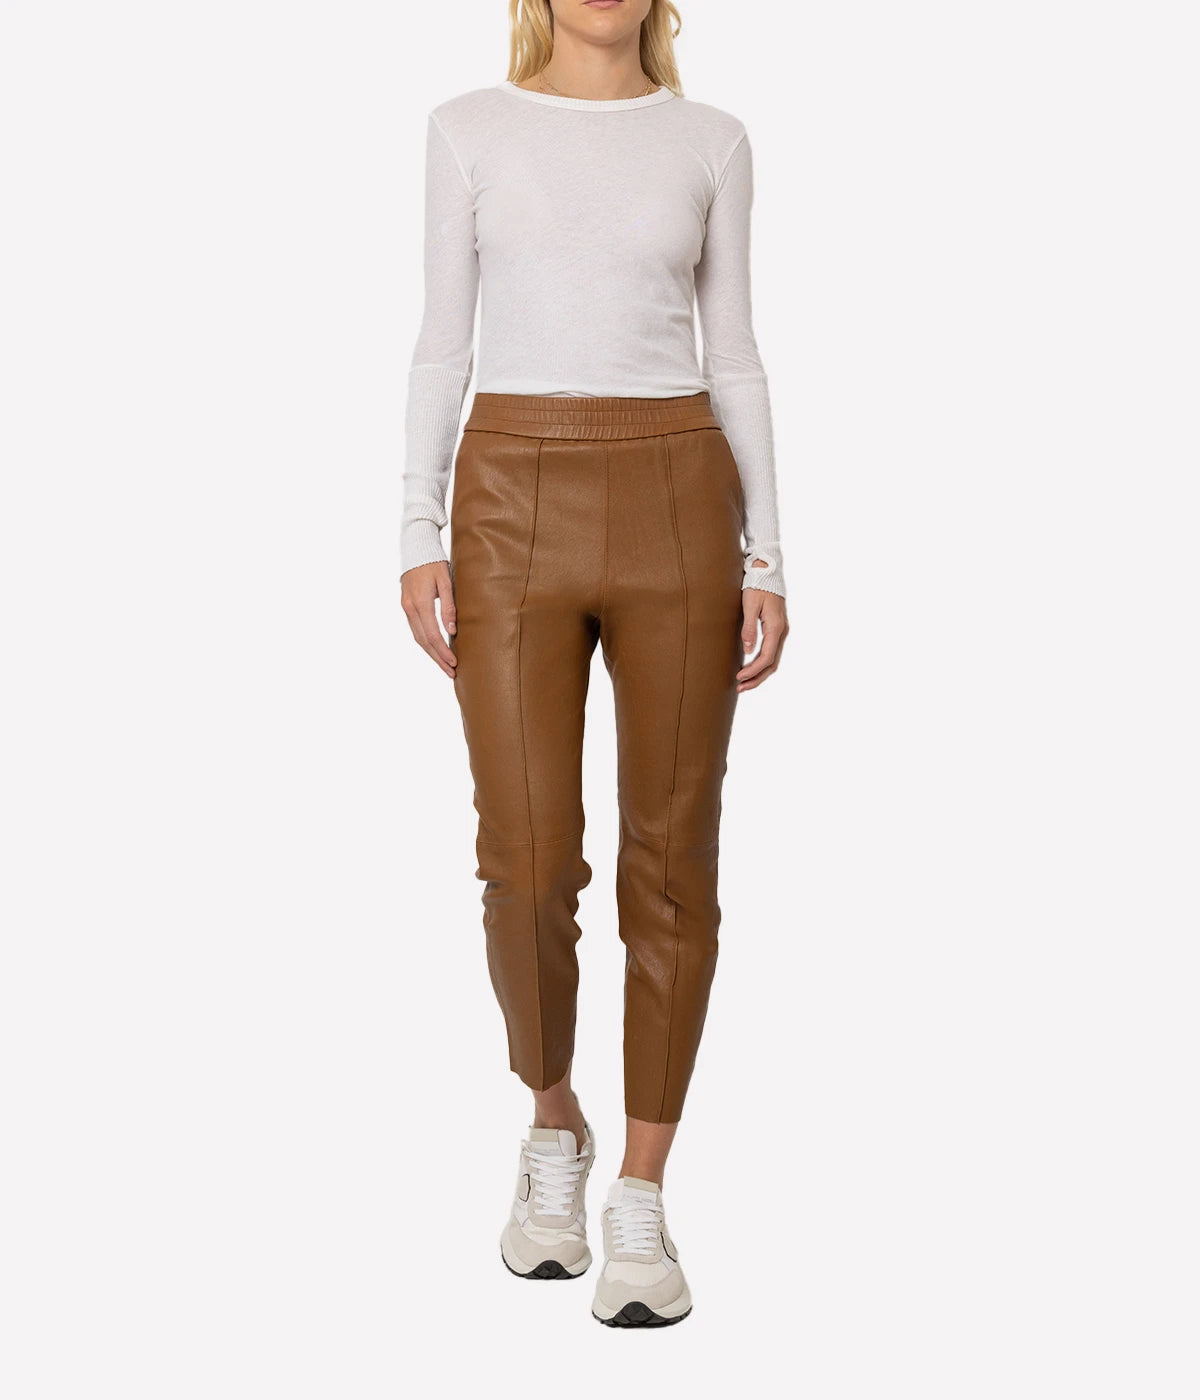 Slim Jogger Leather Pant with Pockets in Walnut